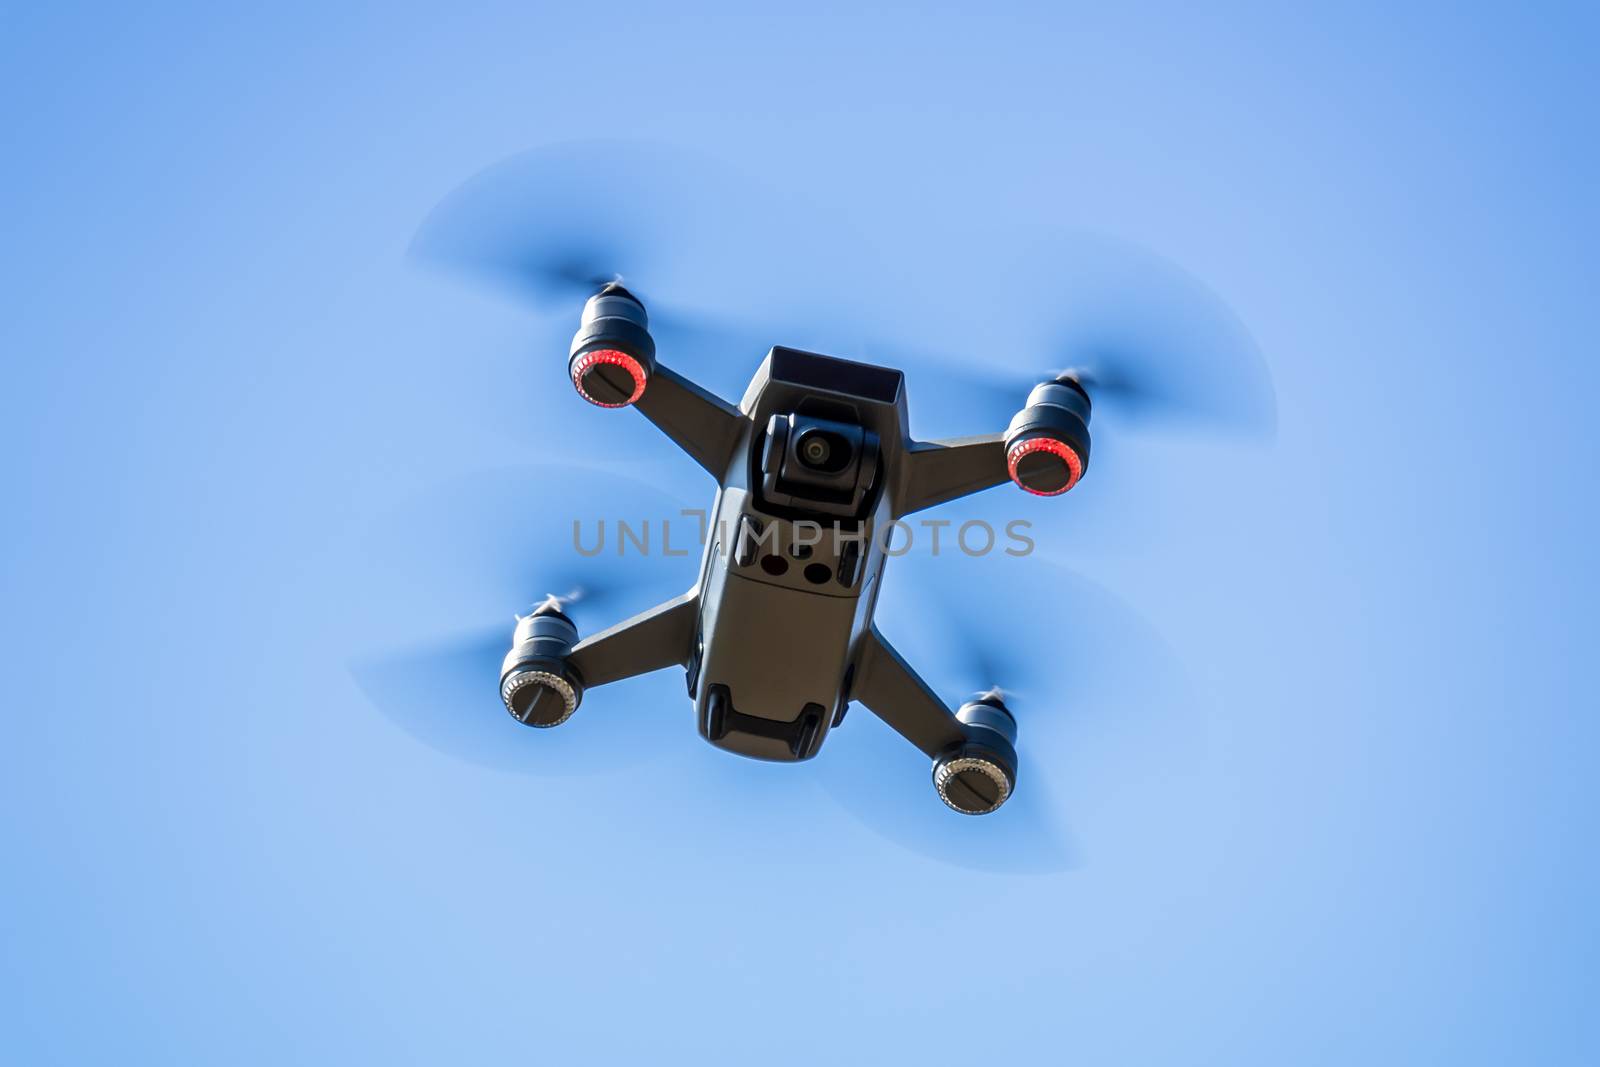 An image of a toy drone blue sky background